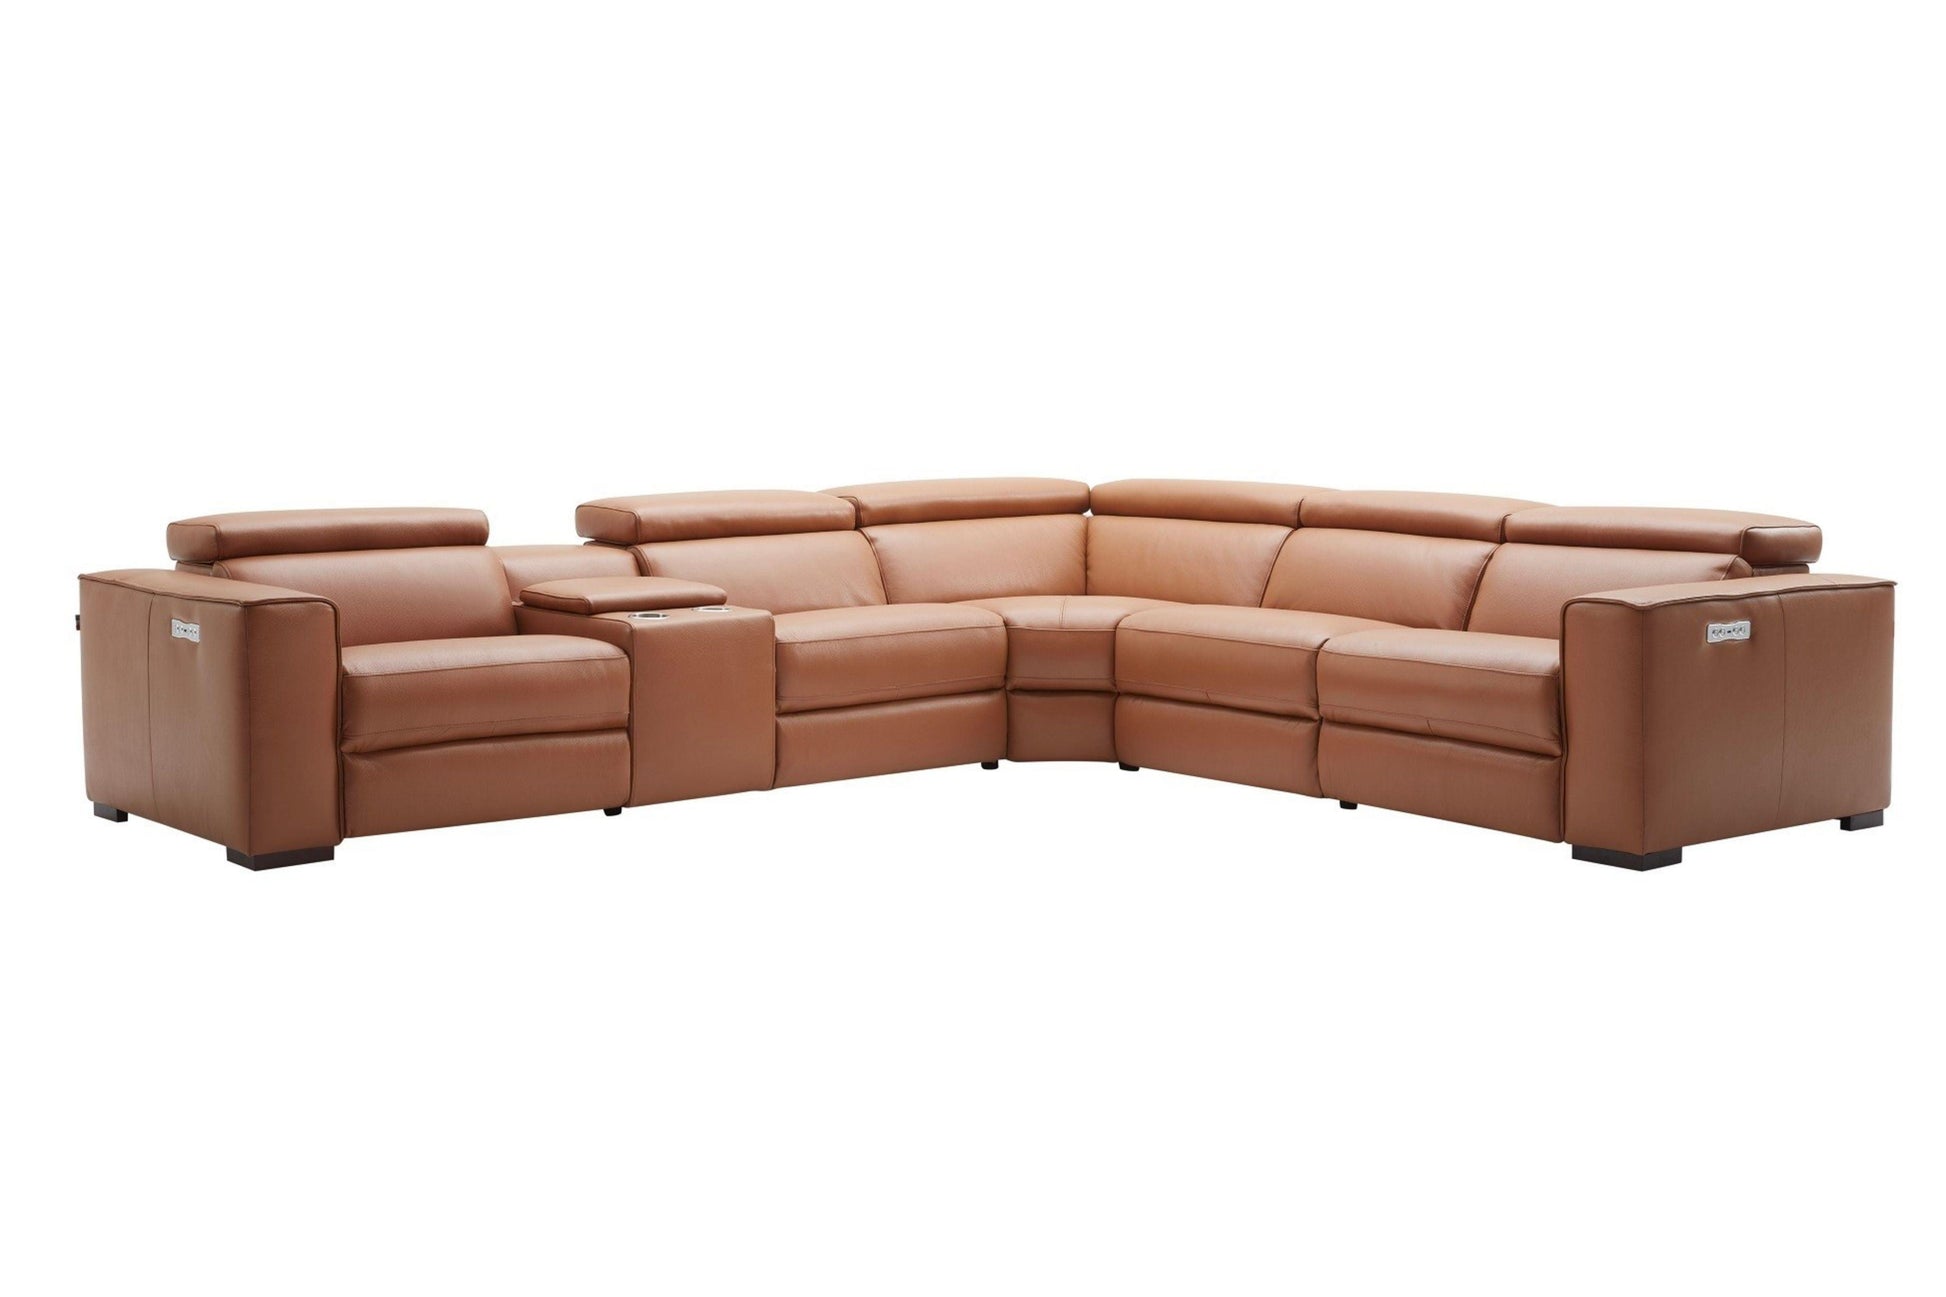 Picasso 6Pc Motion Sectional In White - Venini Furniture 